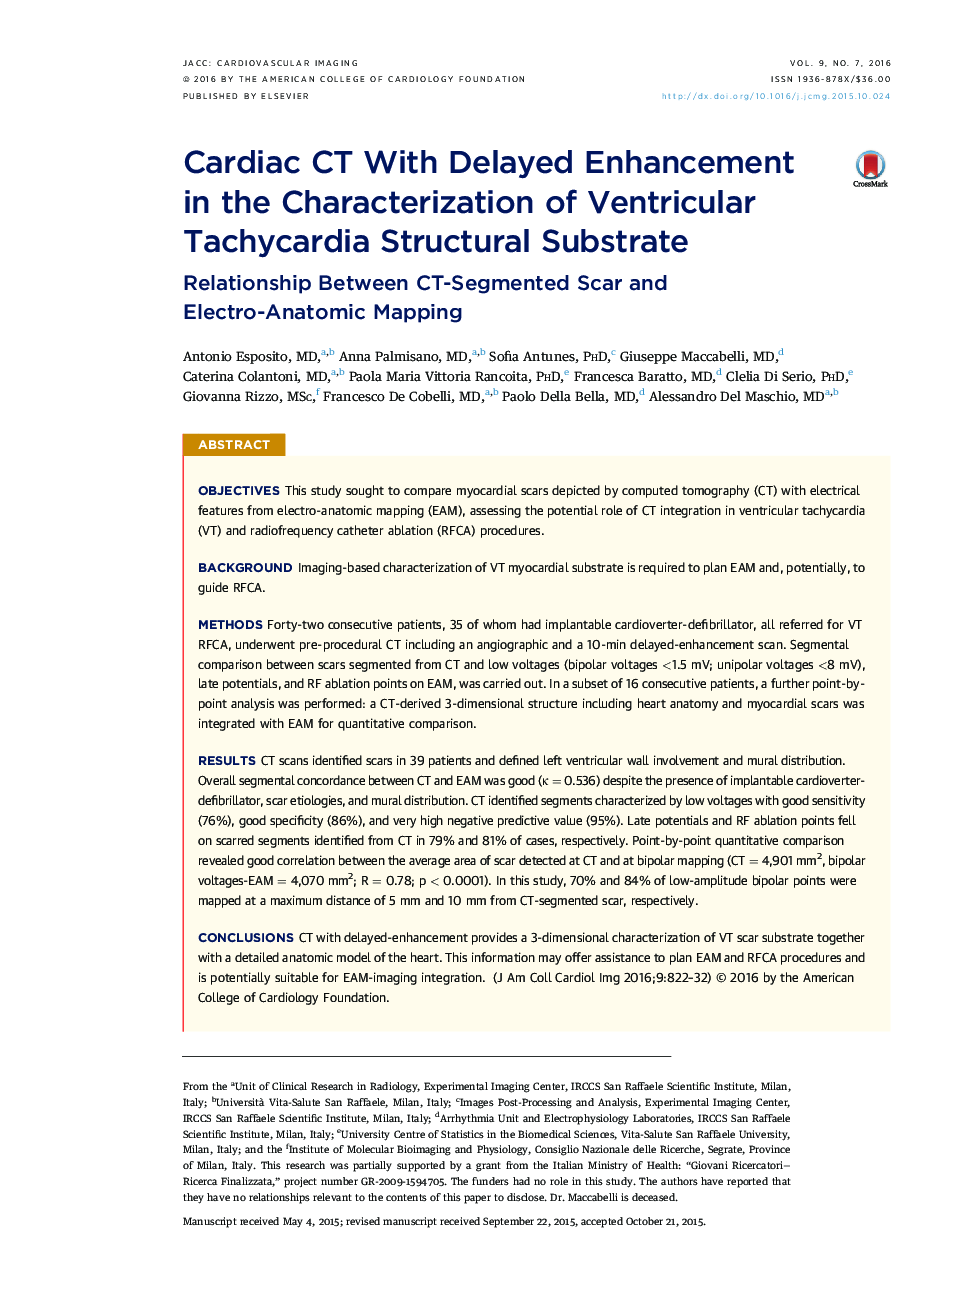 Cardiac CT With Delayed Enhancement inÂ the Characterization of Ventricular Tachycardia Structural Substrate: Relationship Between CT-Segmented Scar and Electro-Anatomic Mapping